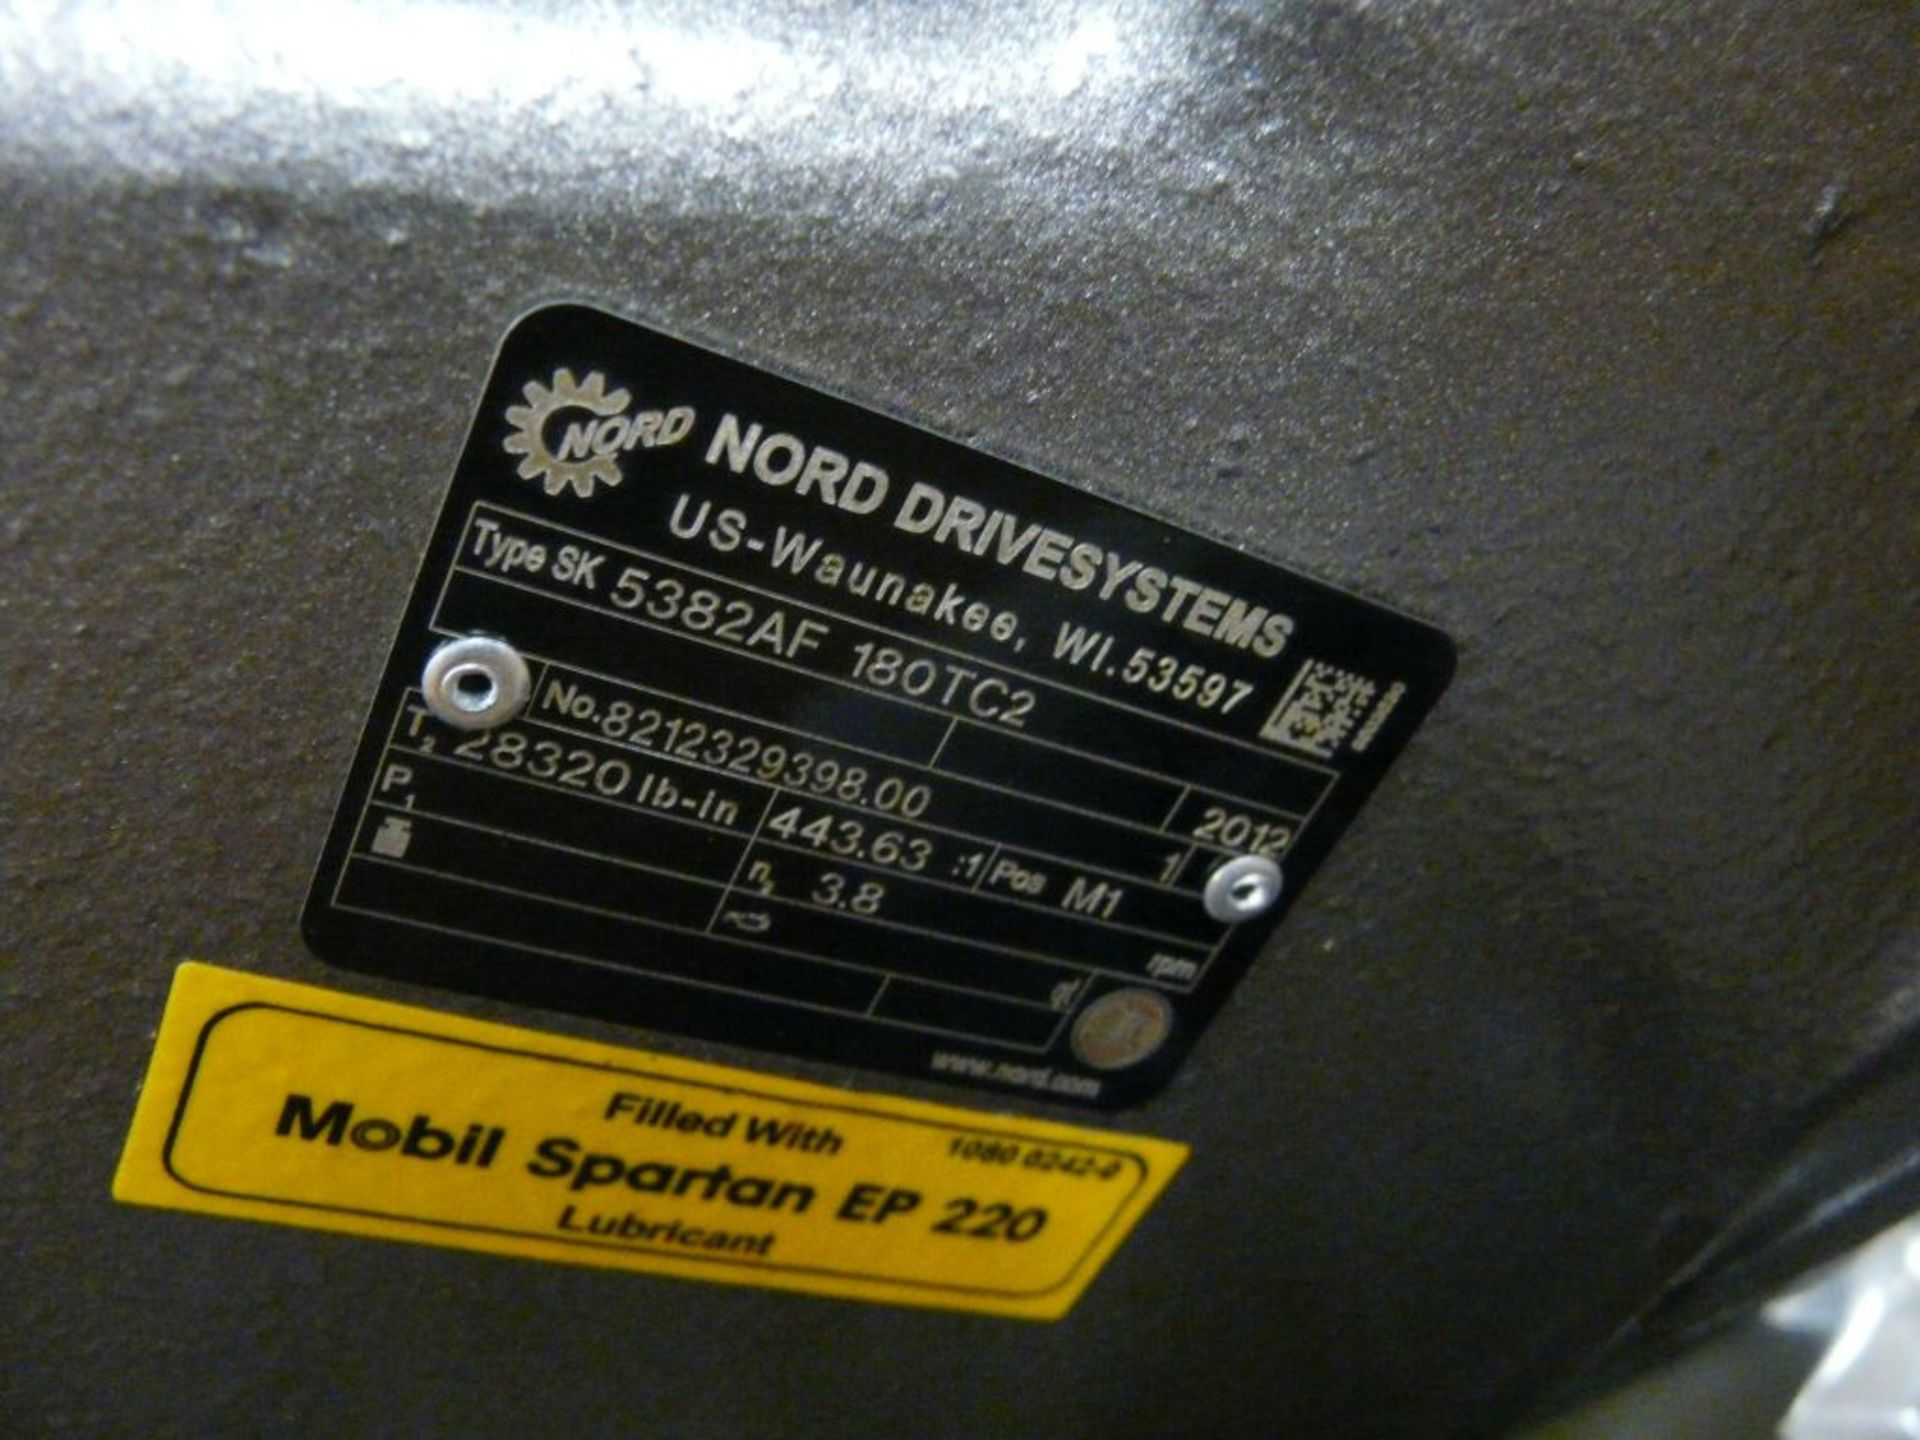 Nord Drive System | Type: SK5382AF 180 TC2; Cat No. 8212329398.00; Tag: 233706 - Image 4 of 6